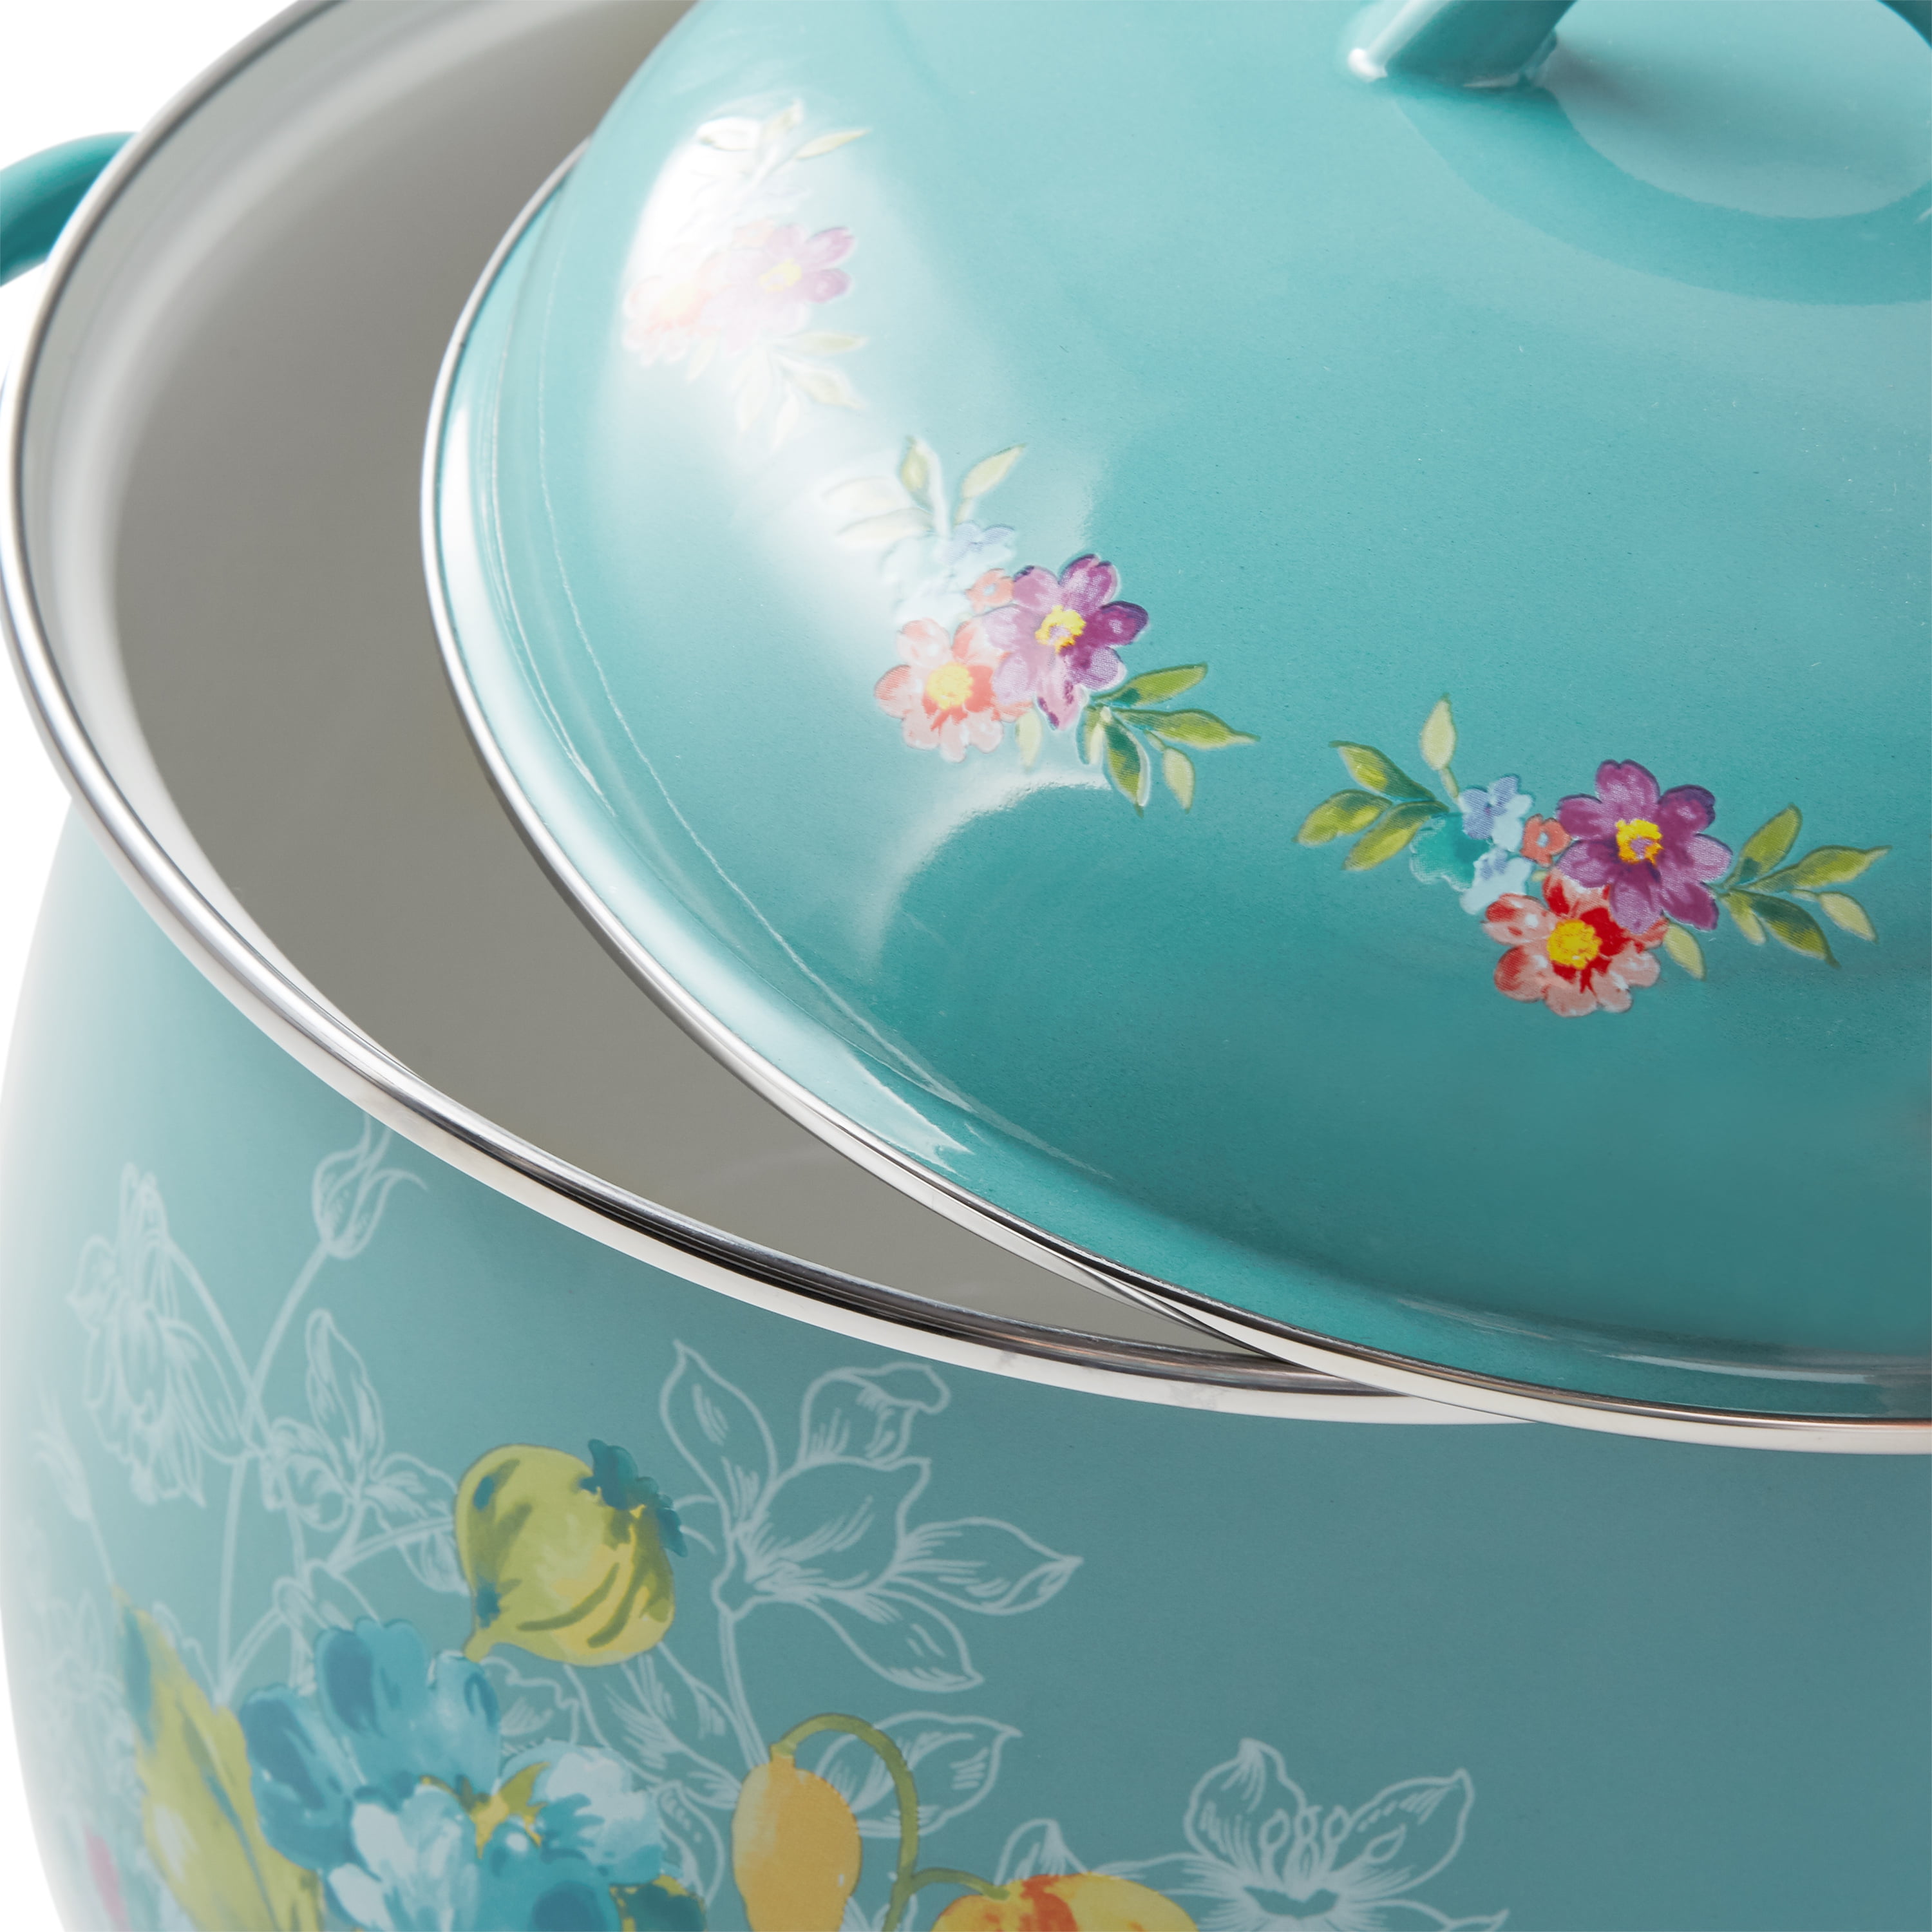 The Pioneer Woman Blooming Bouquet Enamel-on-Steel Grease Strainer, Size: 30 oz